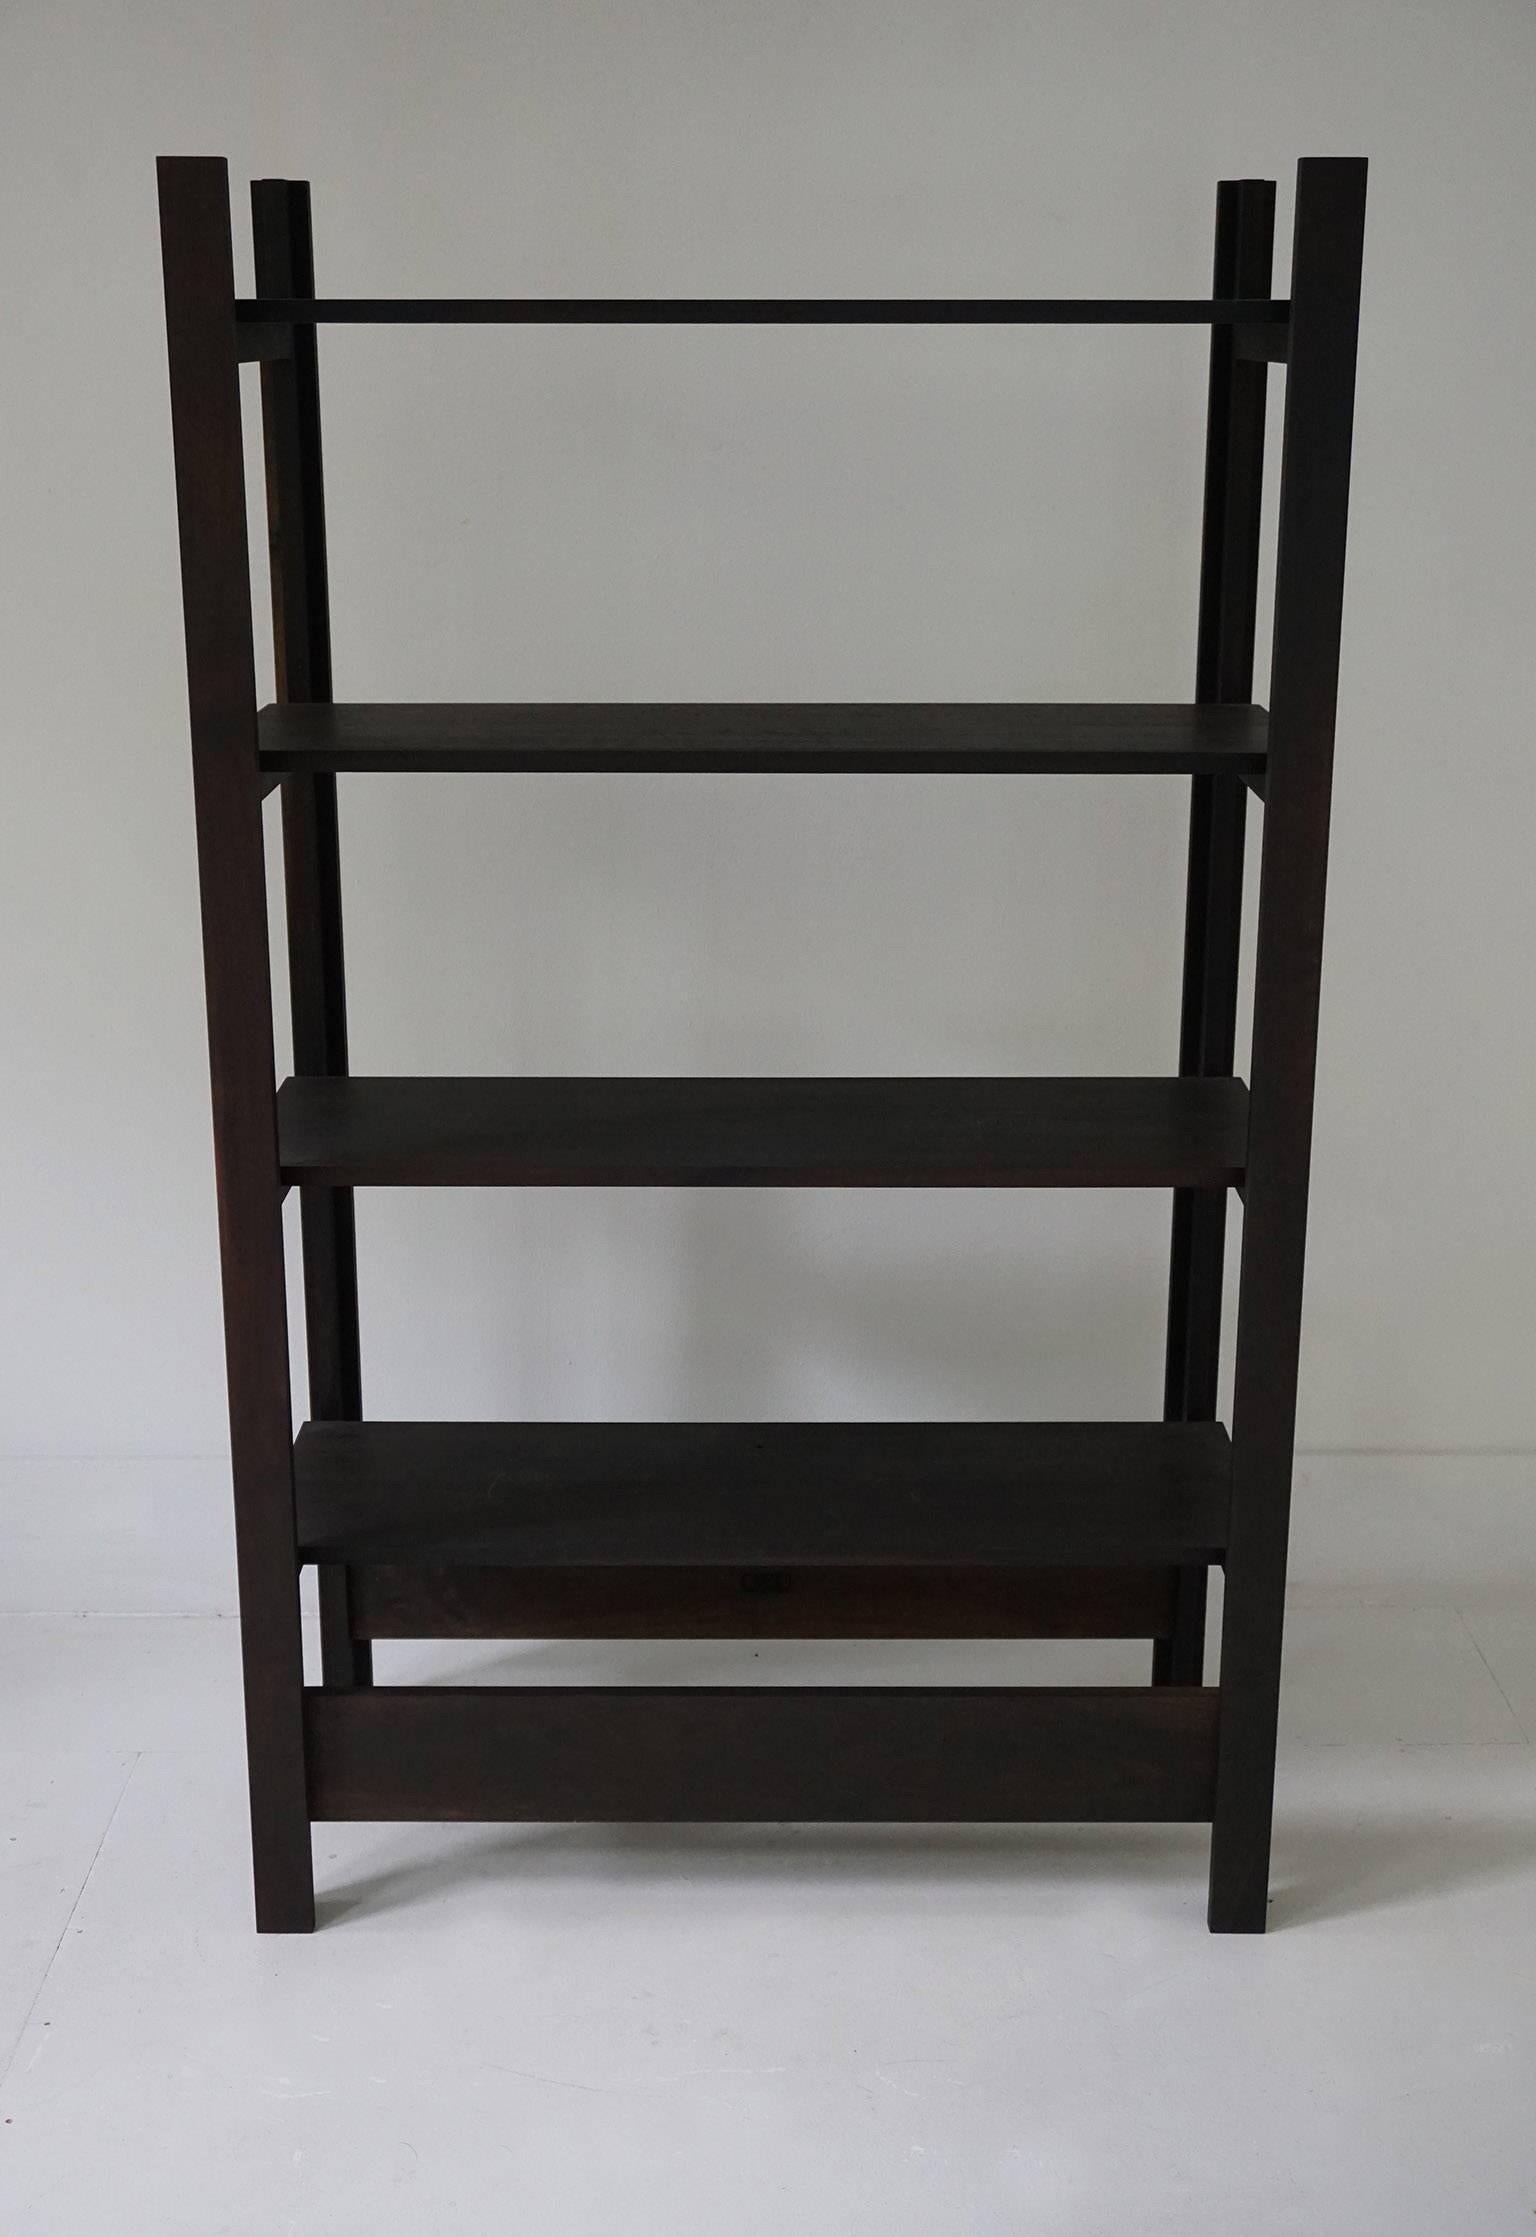 Upland shelving unit in oxidized walnut. Designed for display, books, and storage.